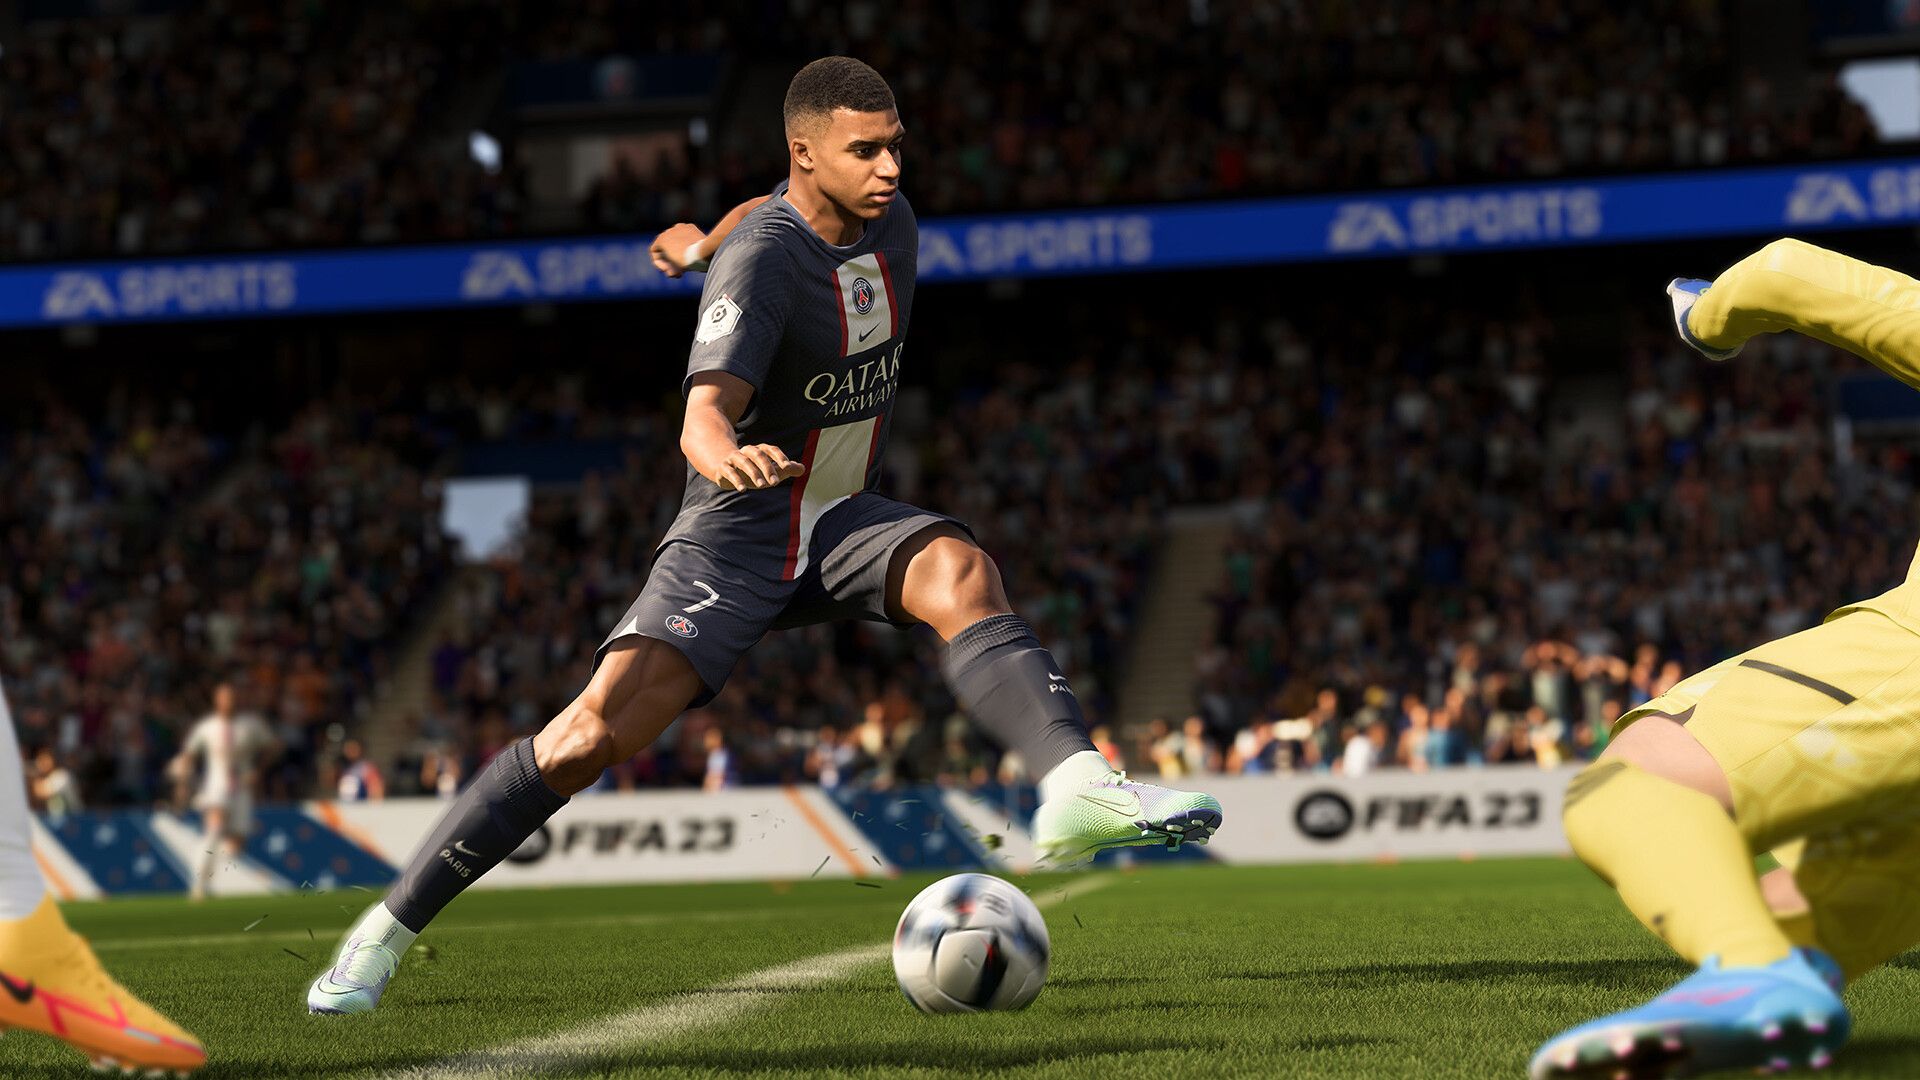 In this article, we are going to be covering how to get FGS Swaps FIFA 23 and help you get tokens in FIFA 23.